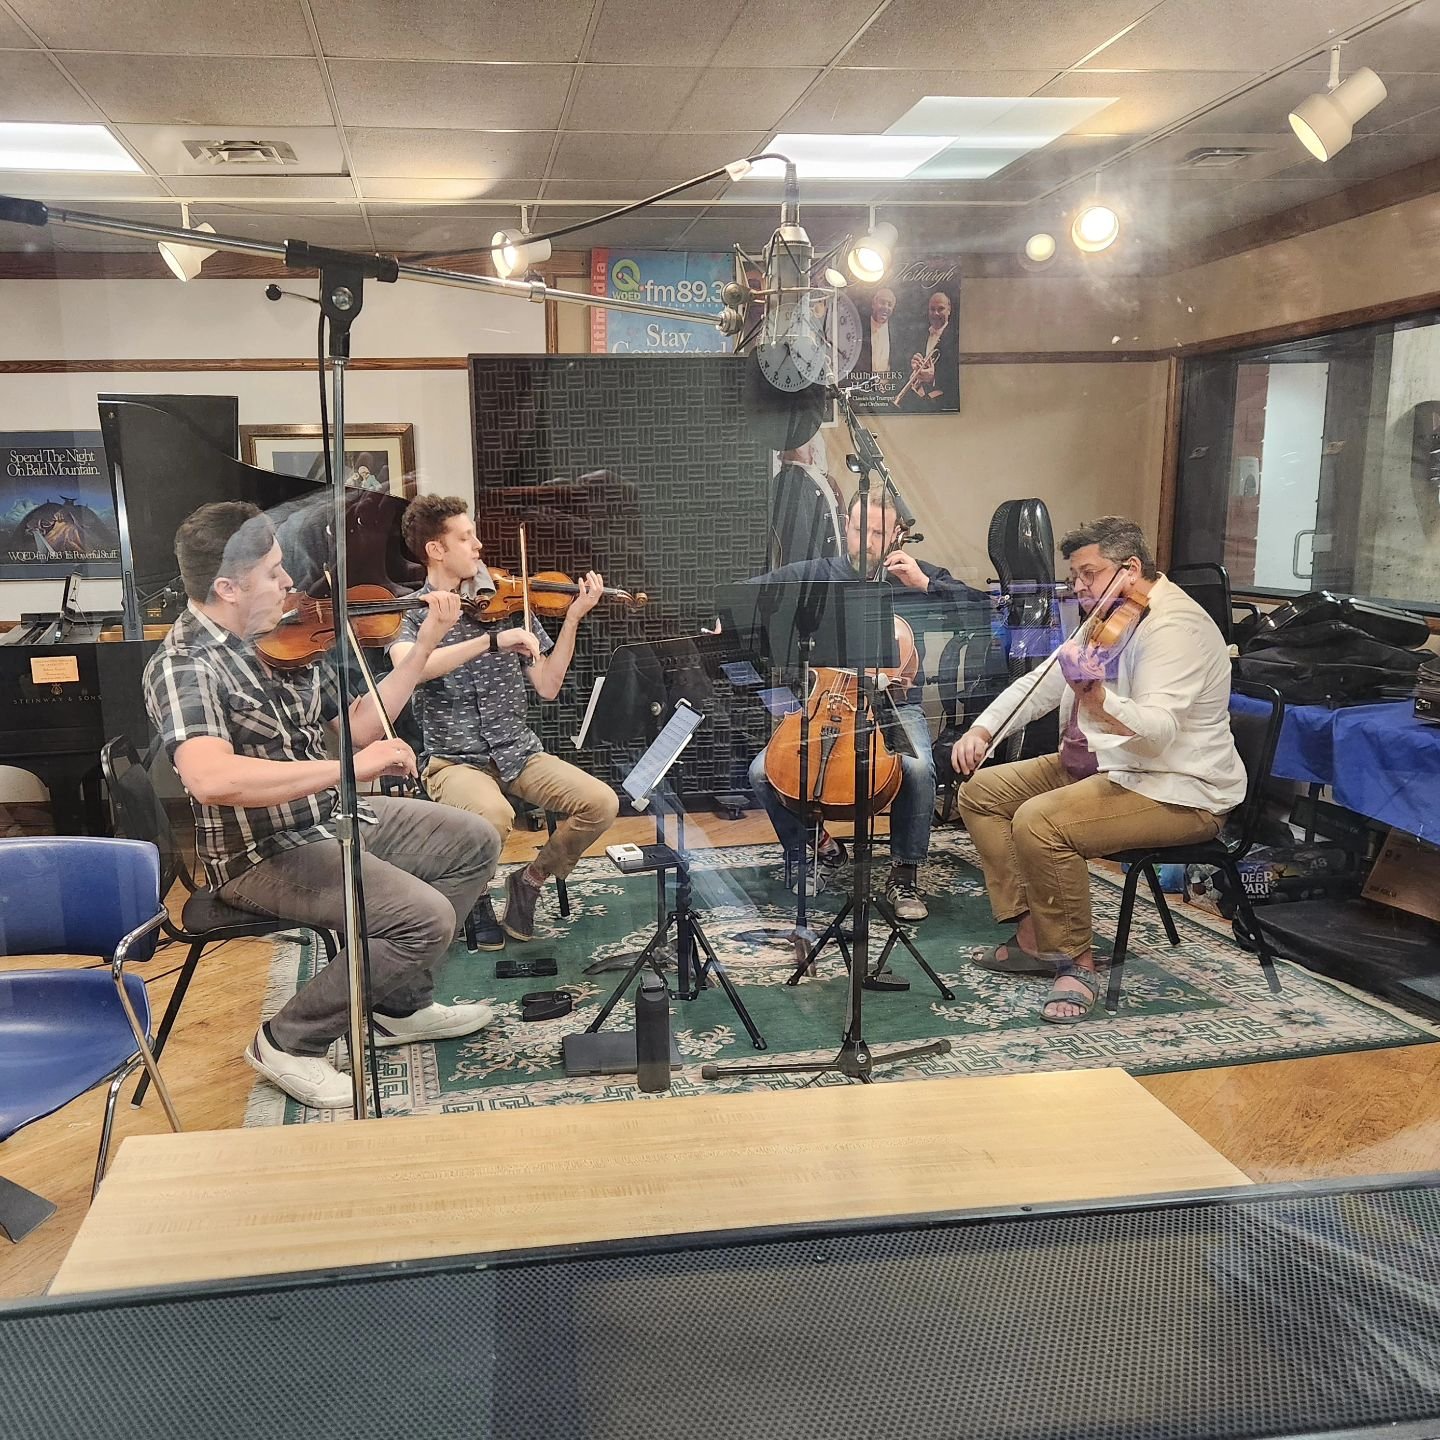 We played some Philip Glass at @wqed today, be sure to listen for it on air. Also, if you're in the Pittsburgh area this Friday, be sure to check out our performance at St. Nicholas Croatian Church. We're playing Bach, Glass, and Shostakovich.